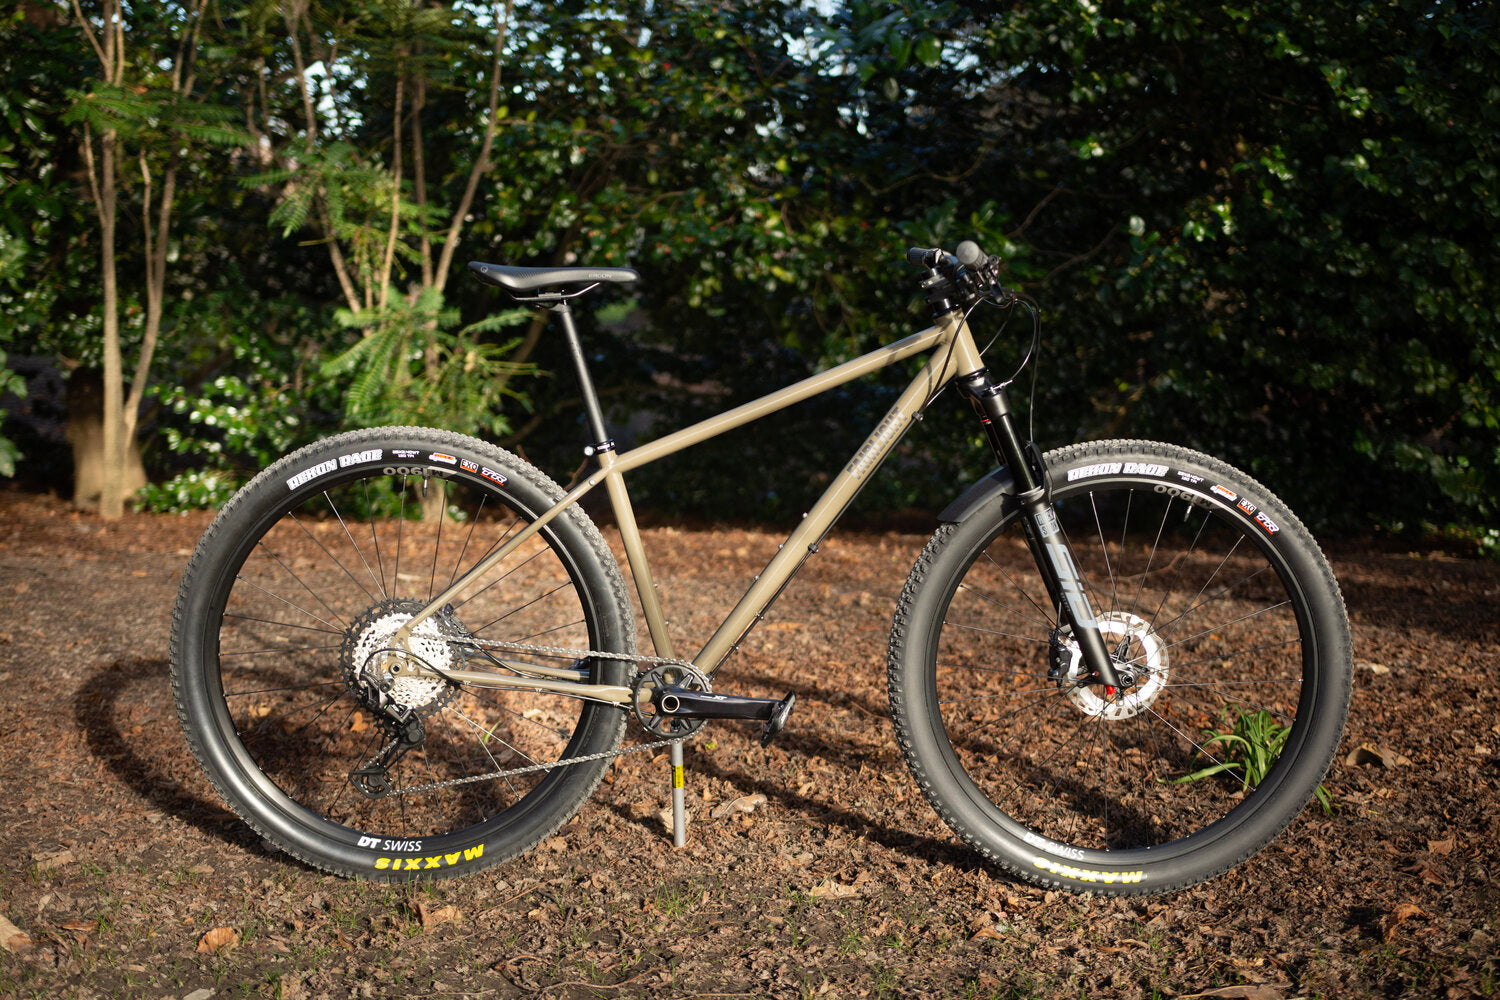 Discovering the Fairlight Holt Mountain Bike